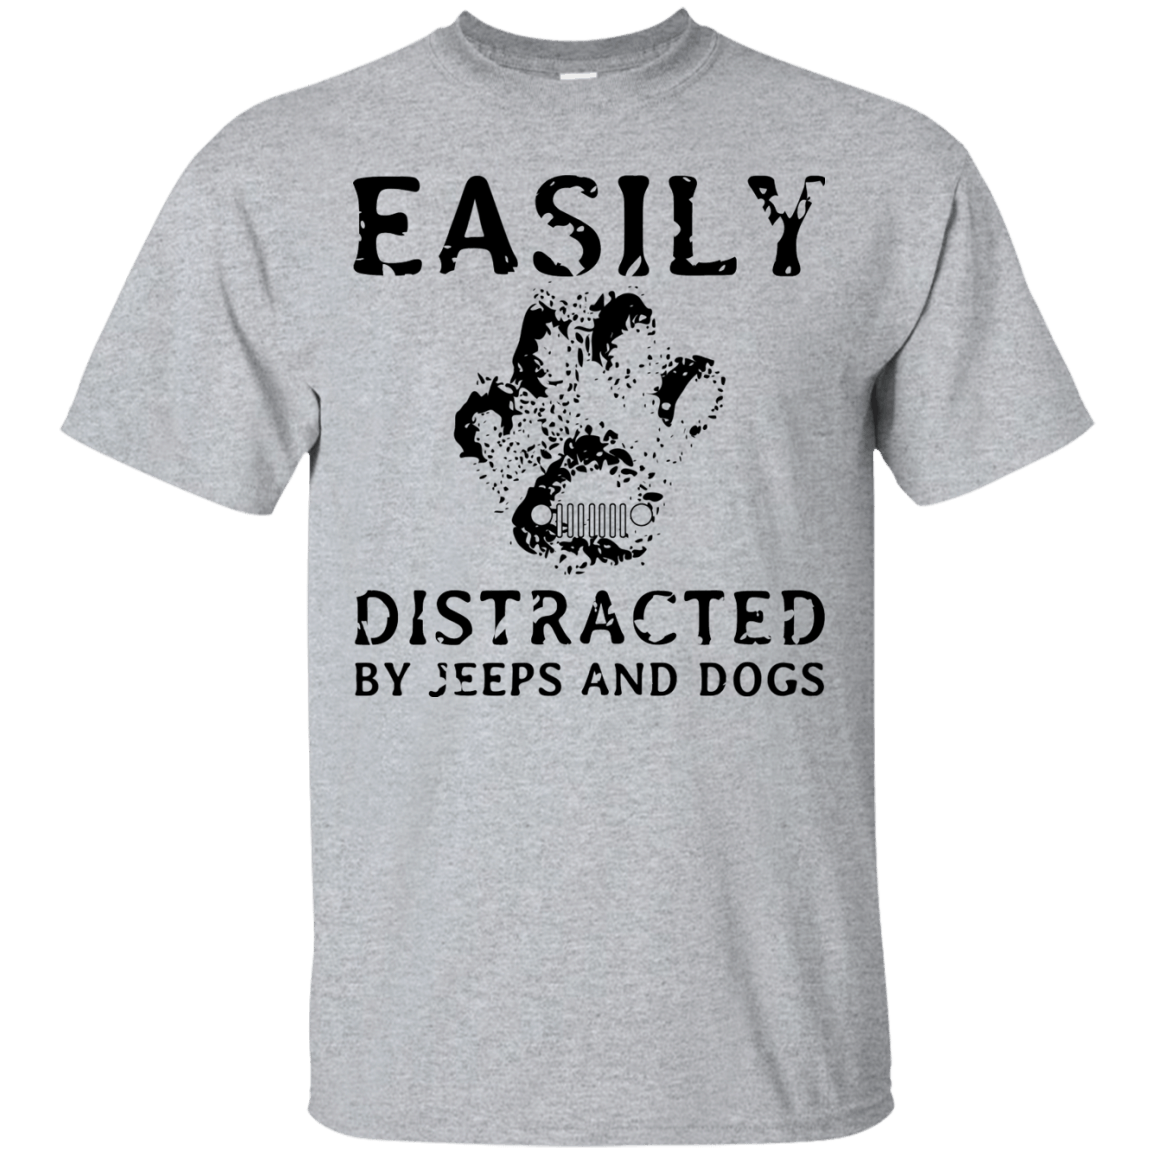 Easily Distracted by Jeeps and Dogs shirt